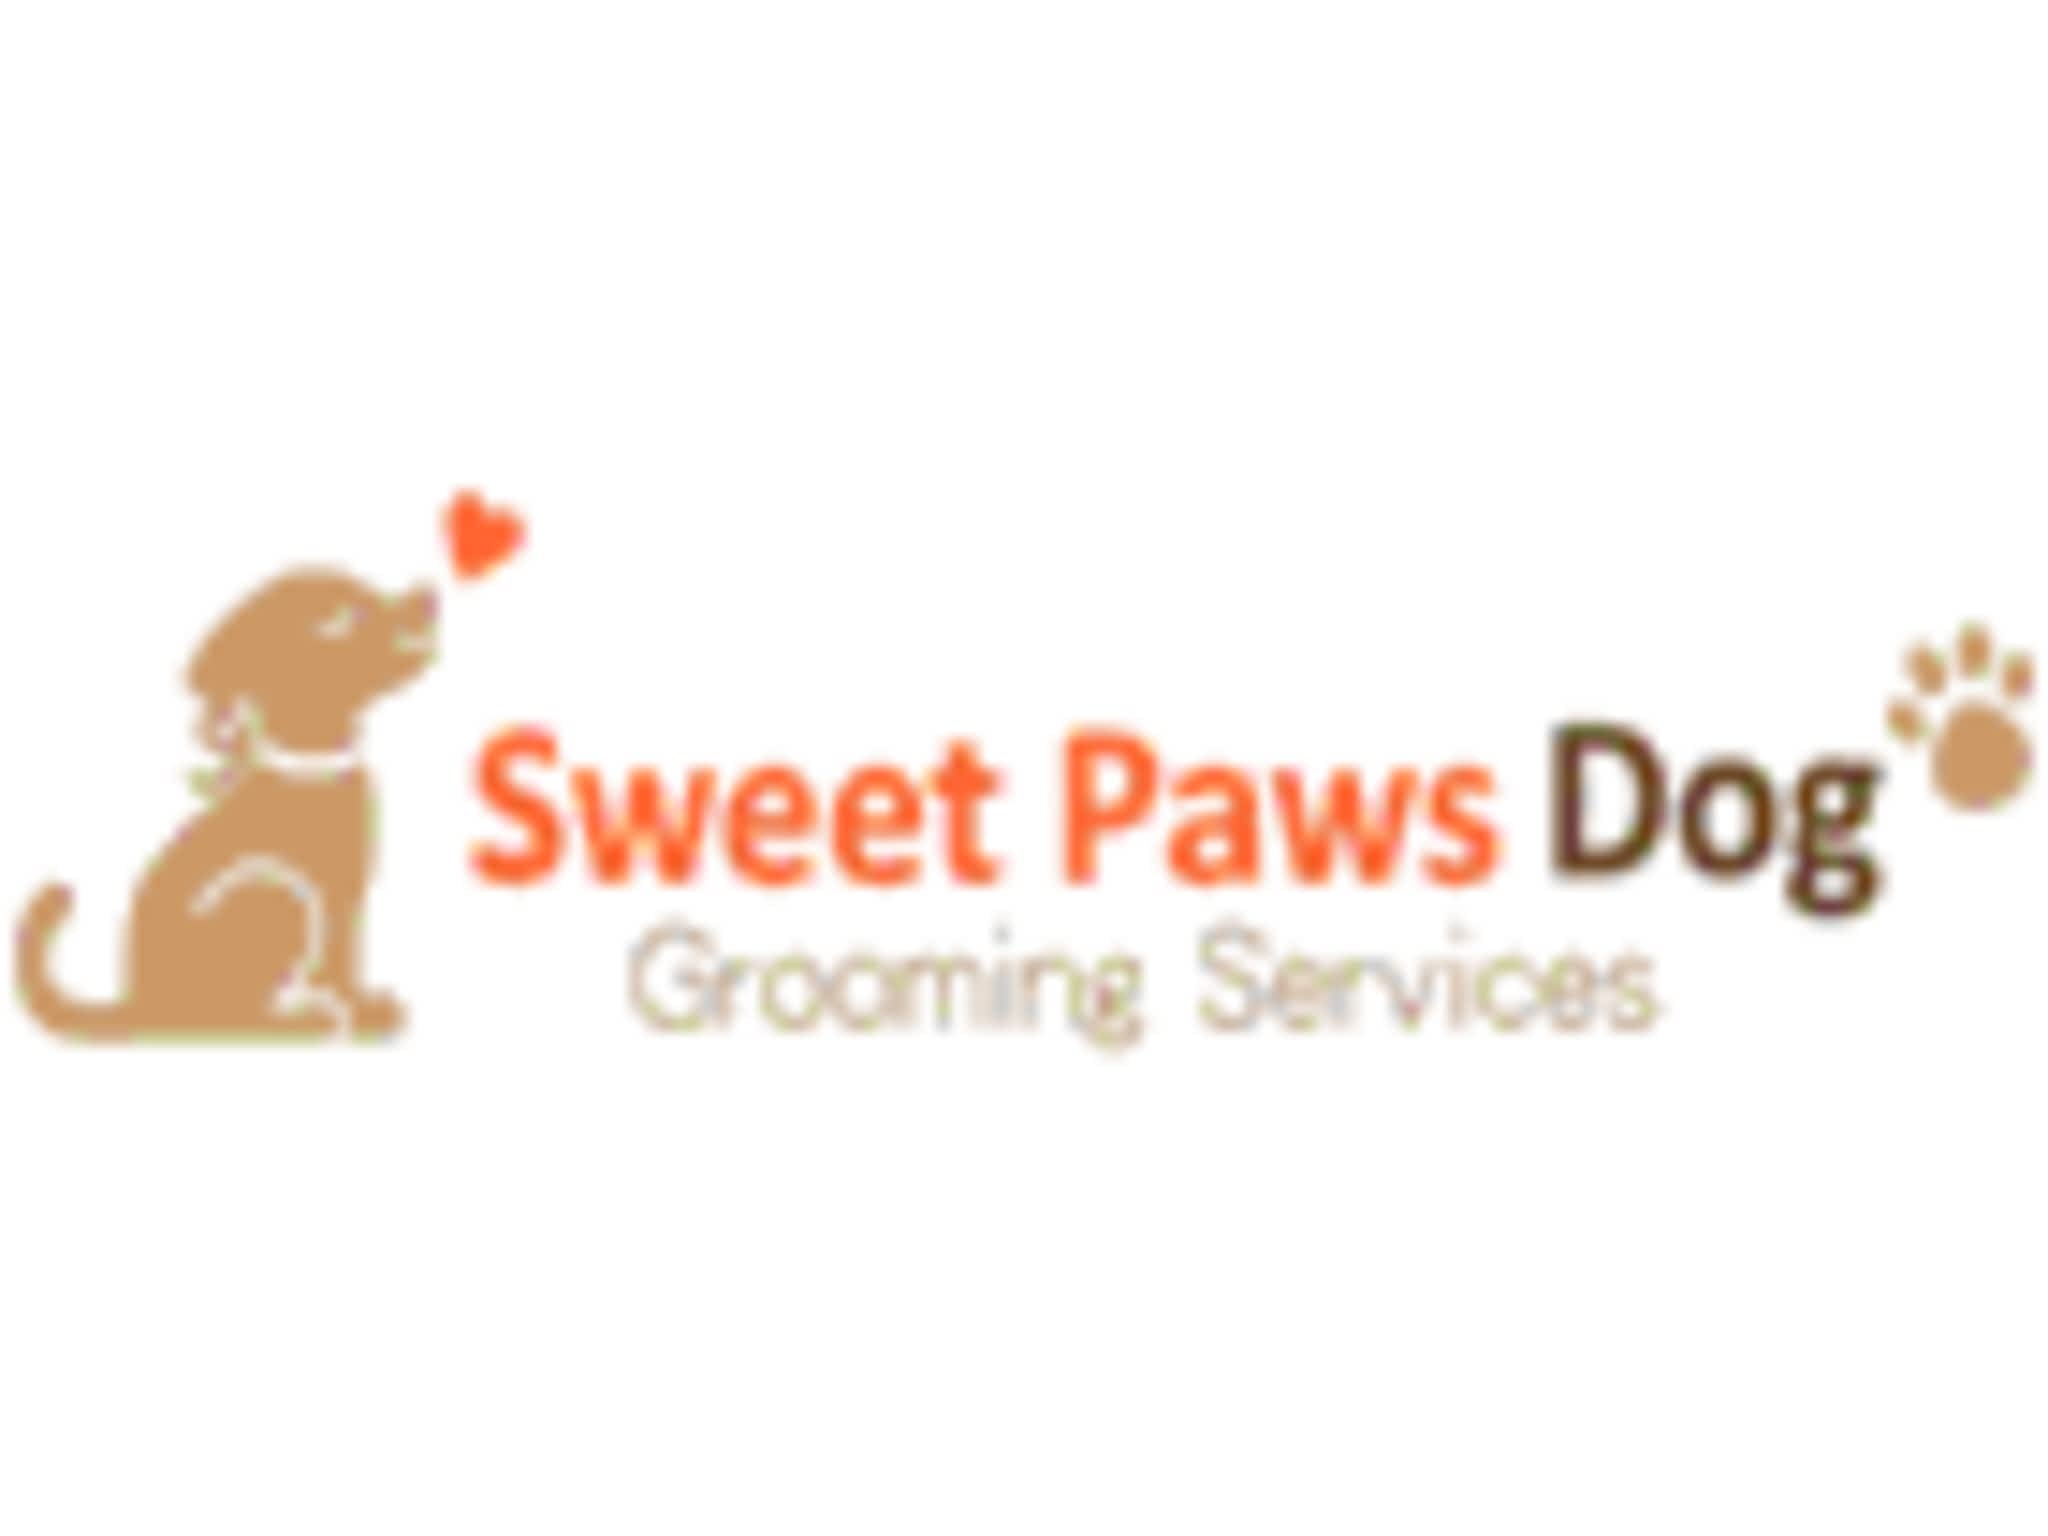 photo Sweet Paws Dog Grooming Services